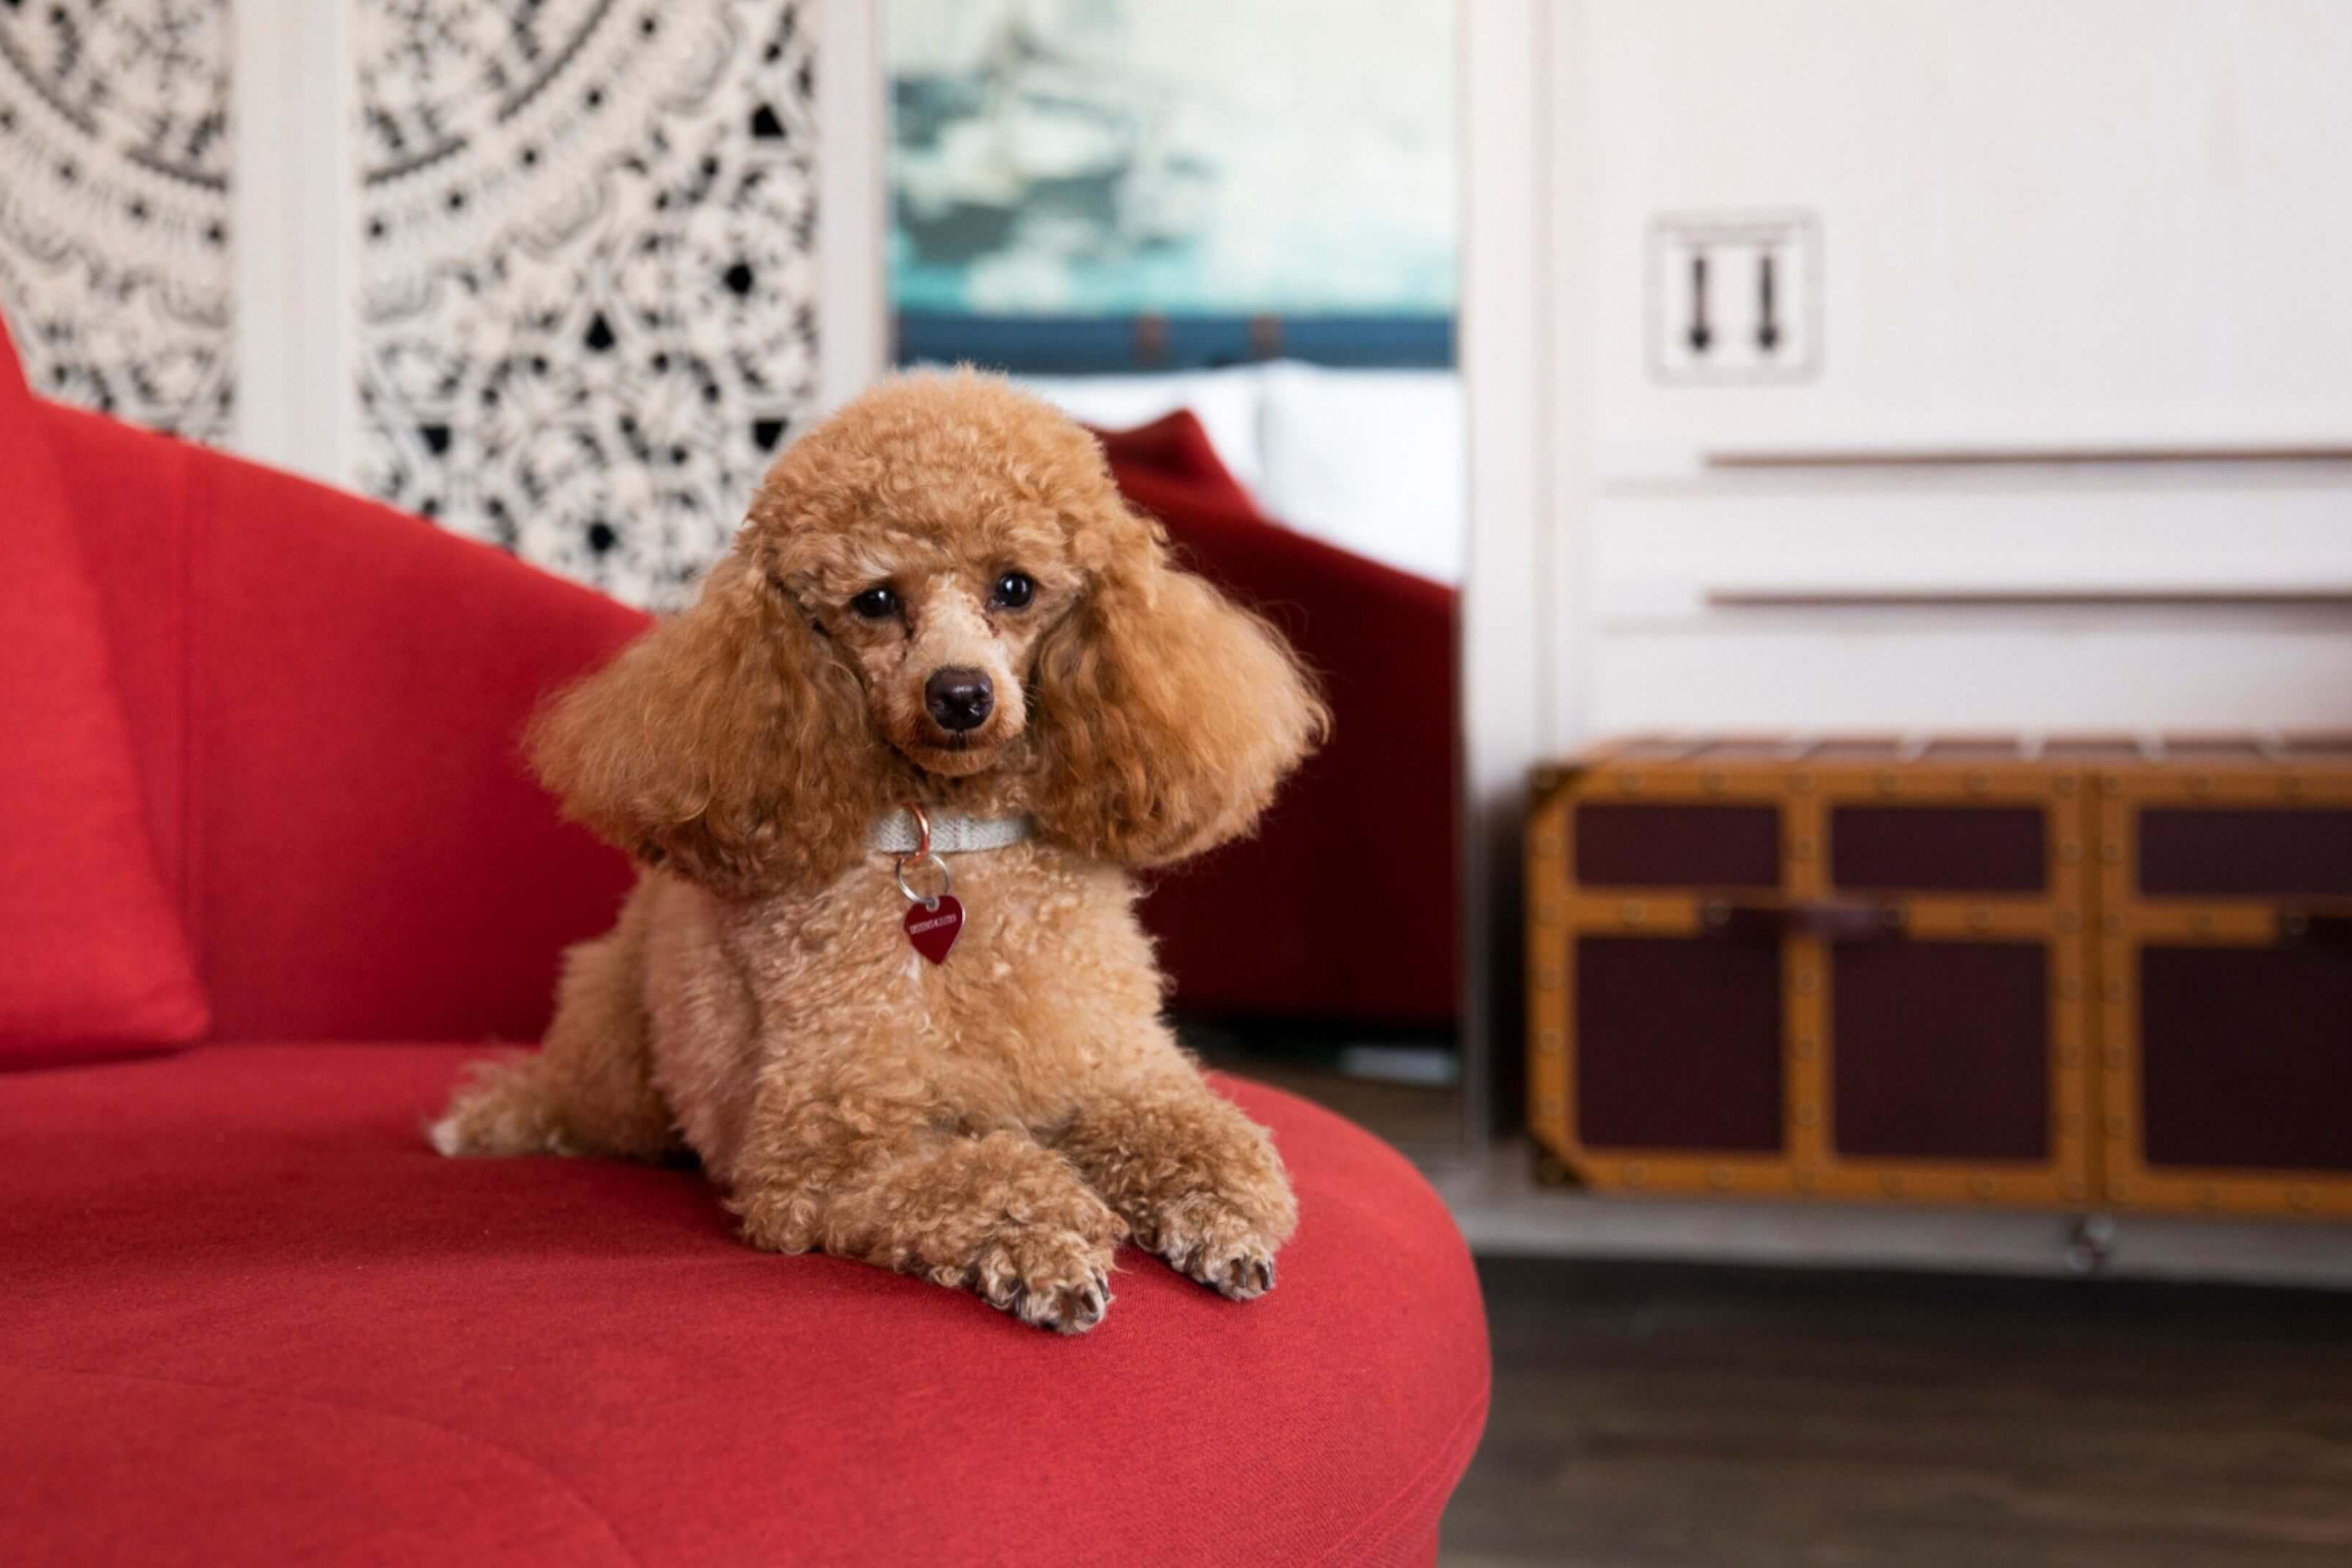 Enjoy a staycation with your four-legged bestie at our pet-friendly property in Downtown Dubai.

What are you waiting for? Grab your pooch and wag on to a staycation at Hotel Indigo Dubai Downtown this month.